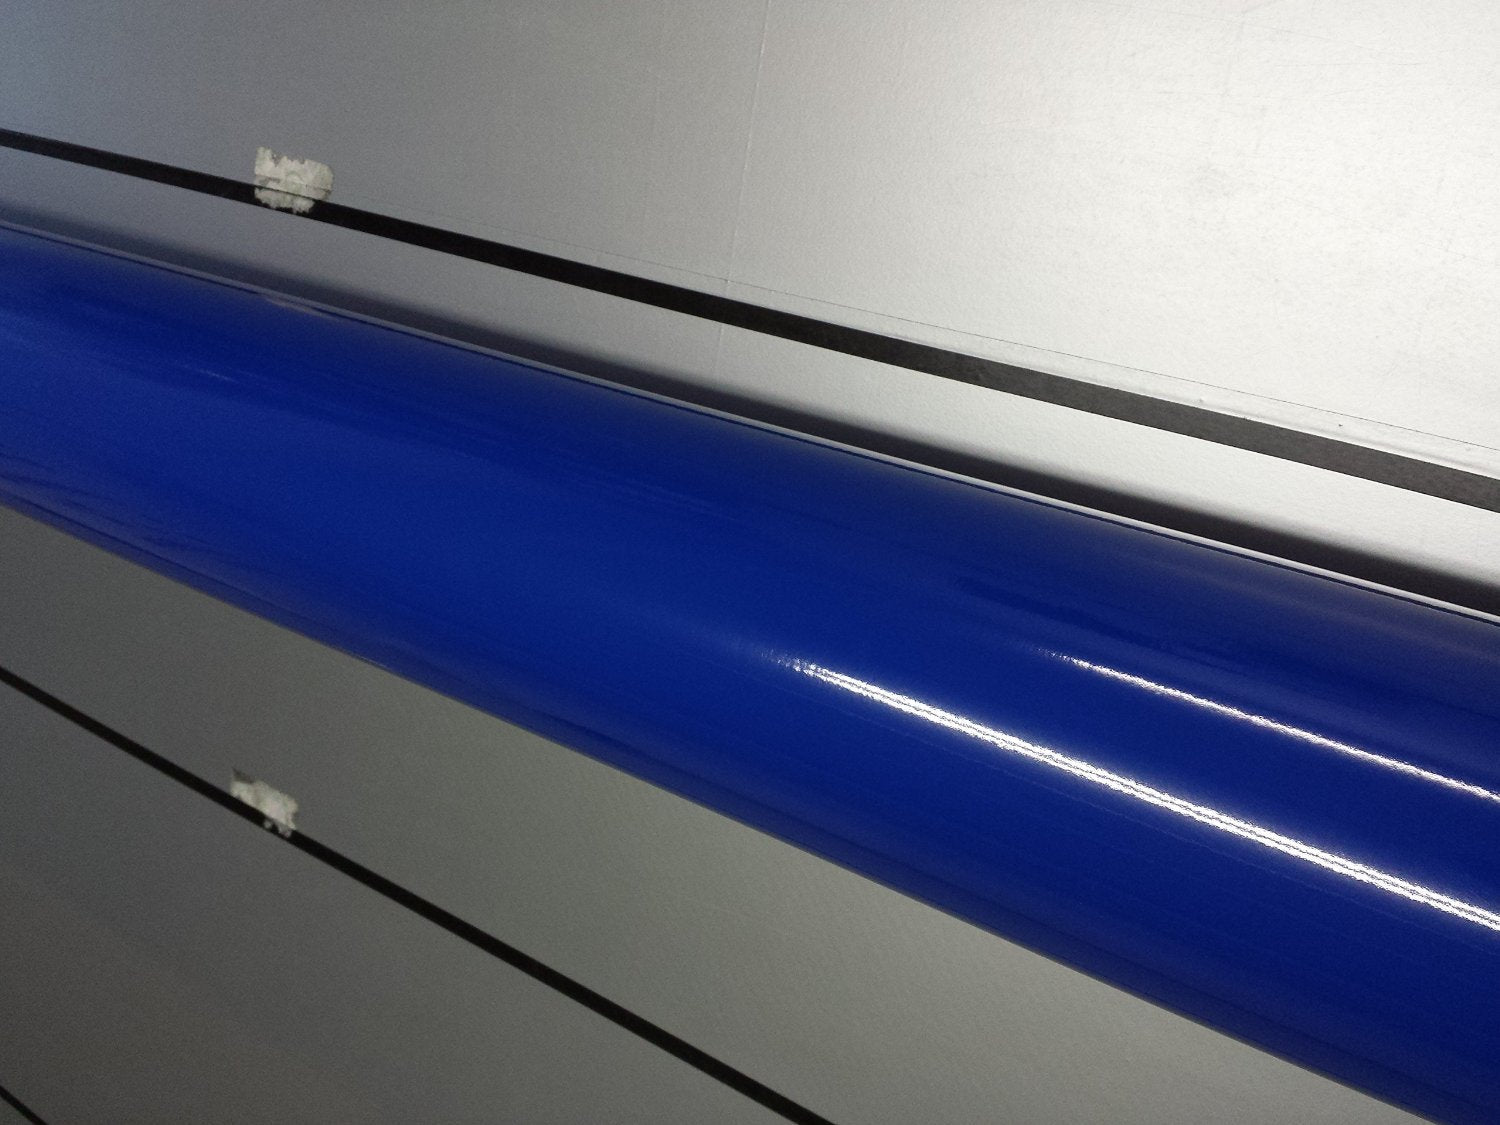 Navy Blue High Gloss Realistic Paint-Like Microfinish Vinyl Wrap Roll with VViViD XPO Air Release Technology - 2ft x 5ft